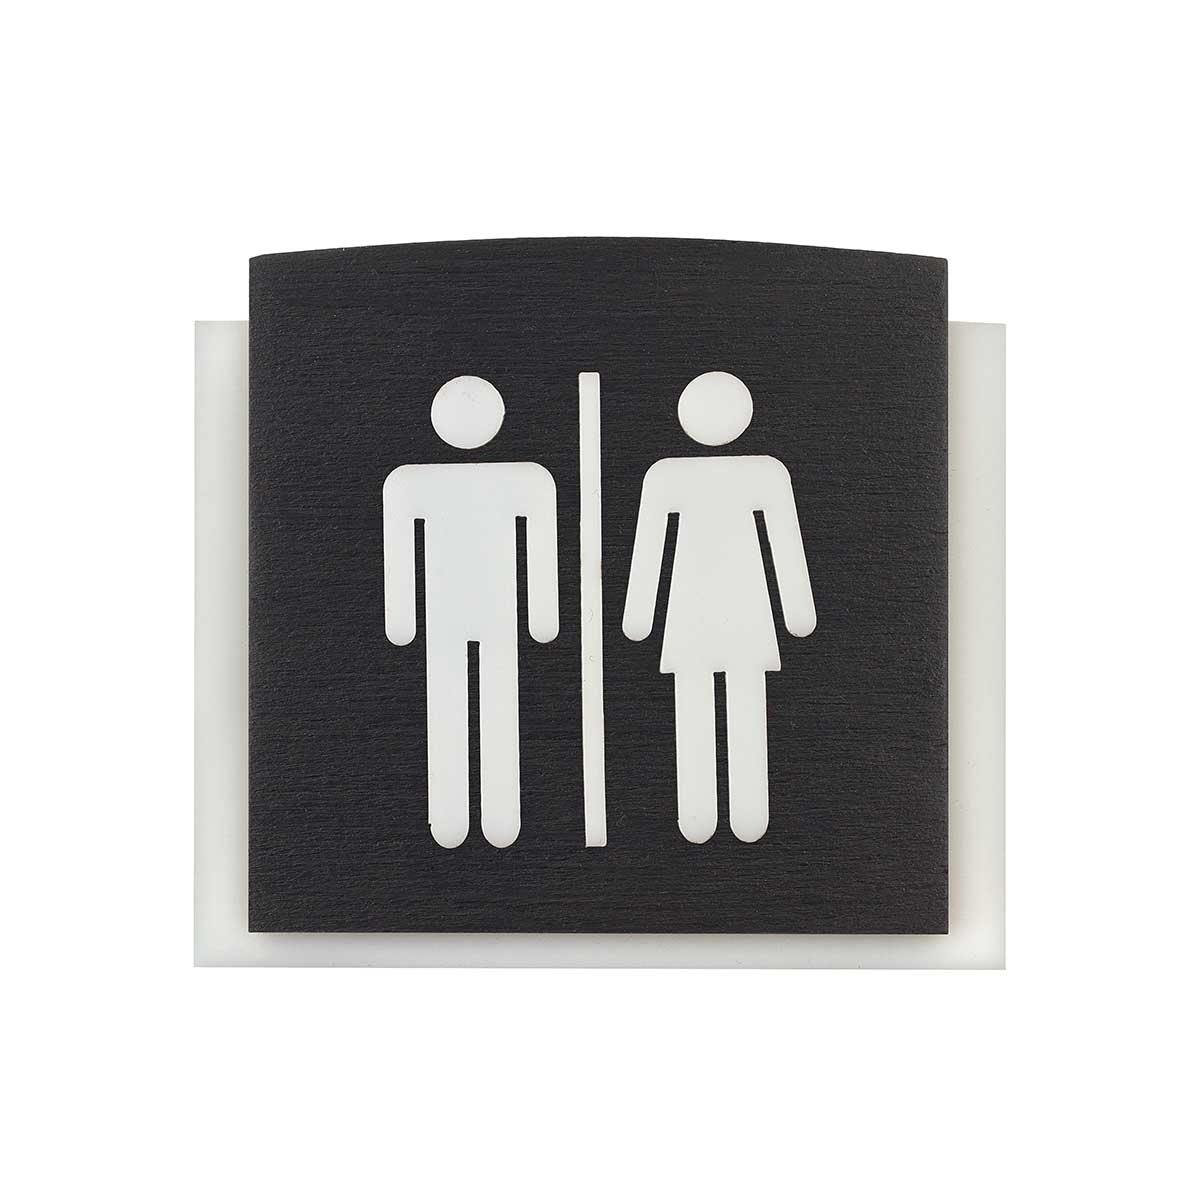 Wood All Gender Signs for Bathroom Bathroom Signs Anthracite Gray Bsign